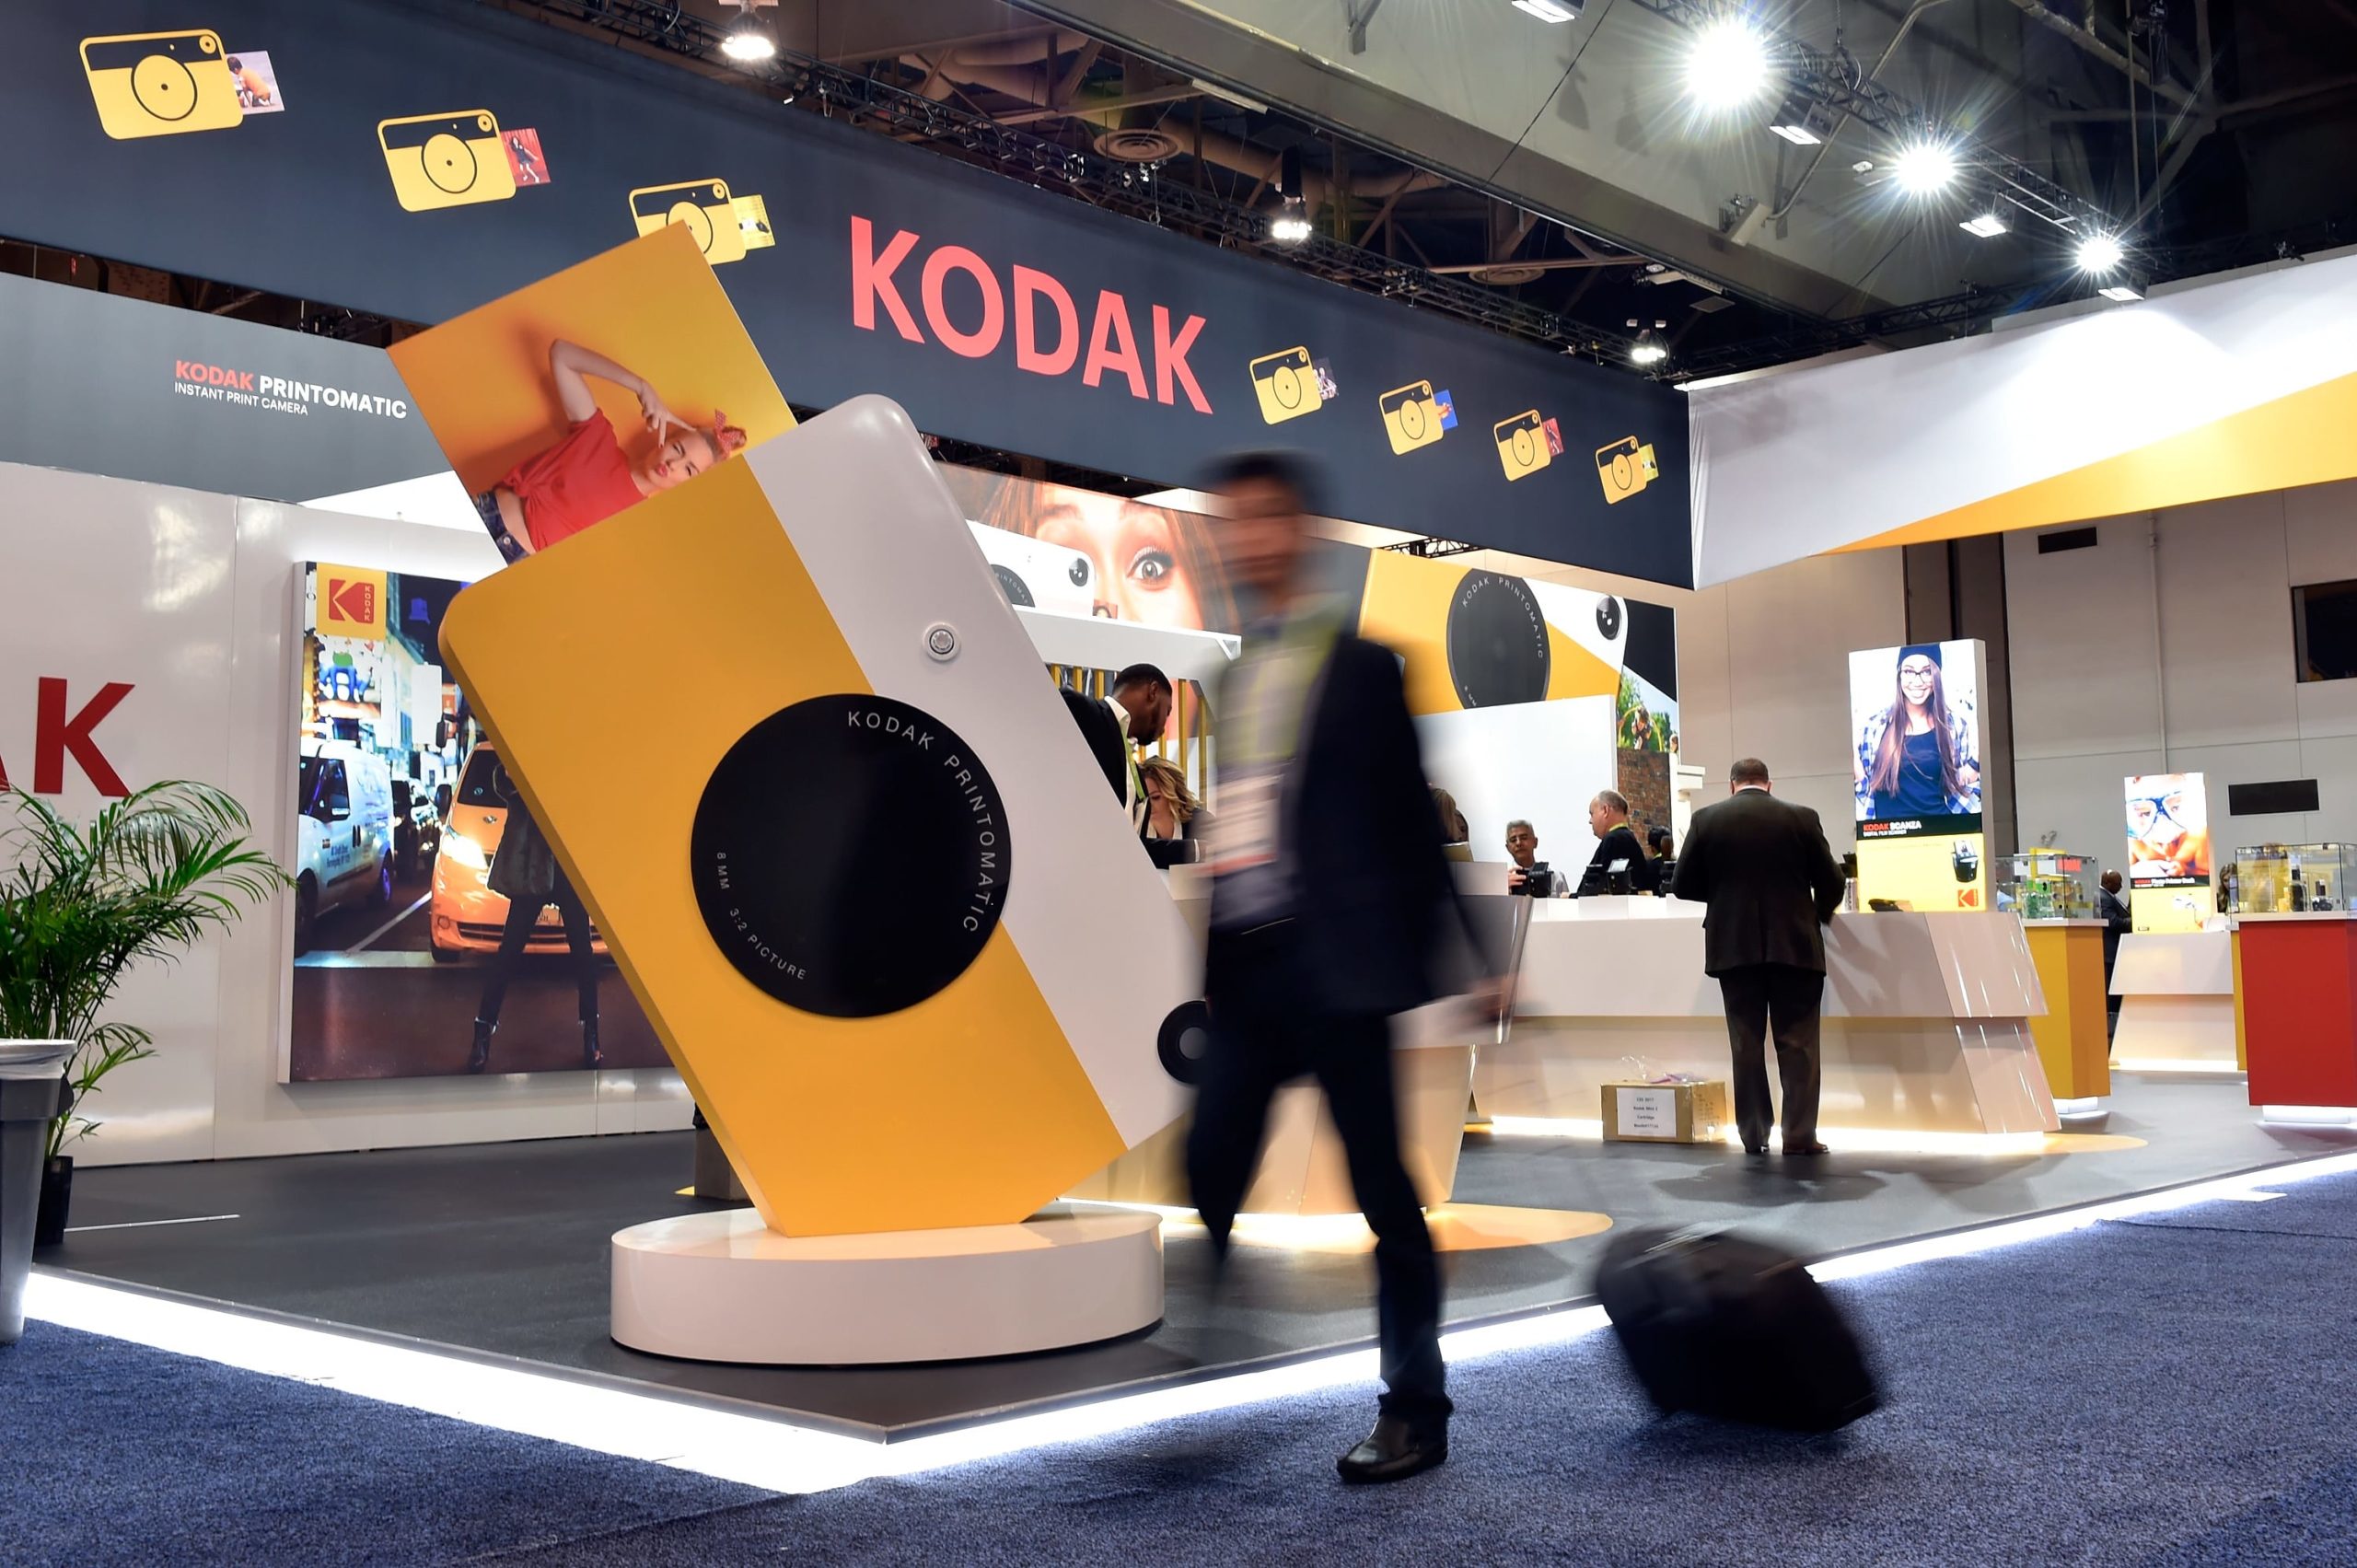 Kodak shares tank greater than 40% as authorities mortgage is placed on pause whereas allegations investigated